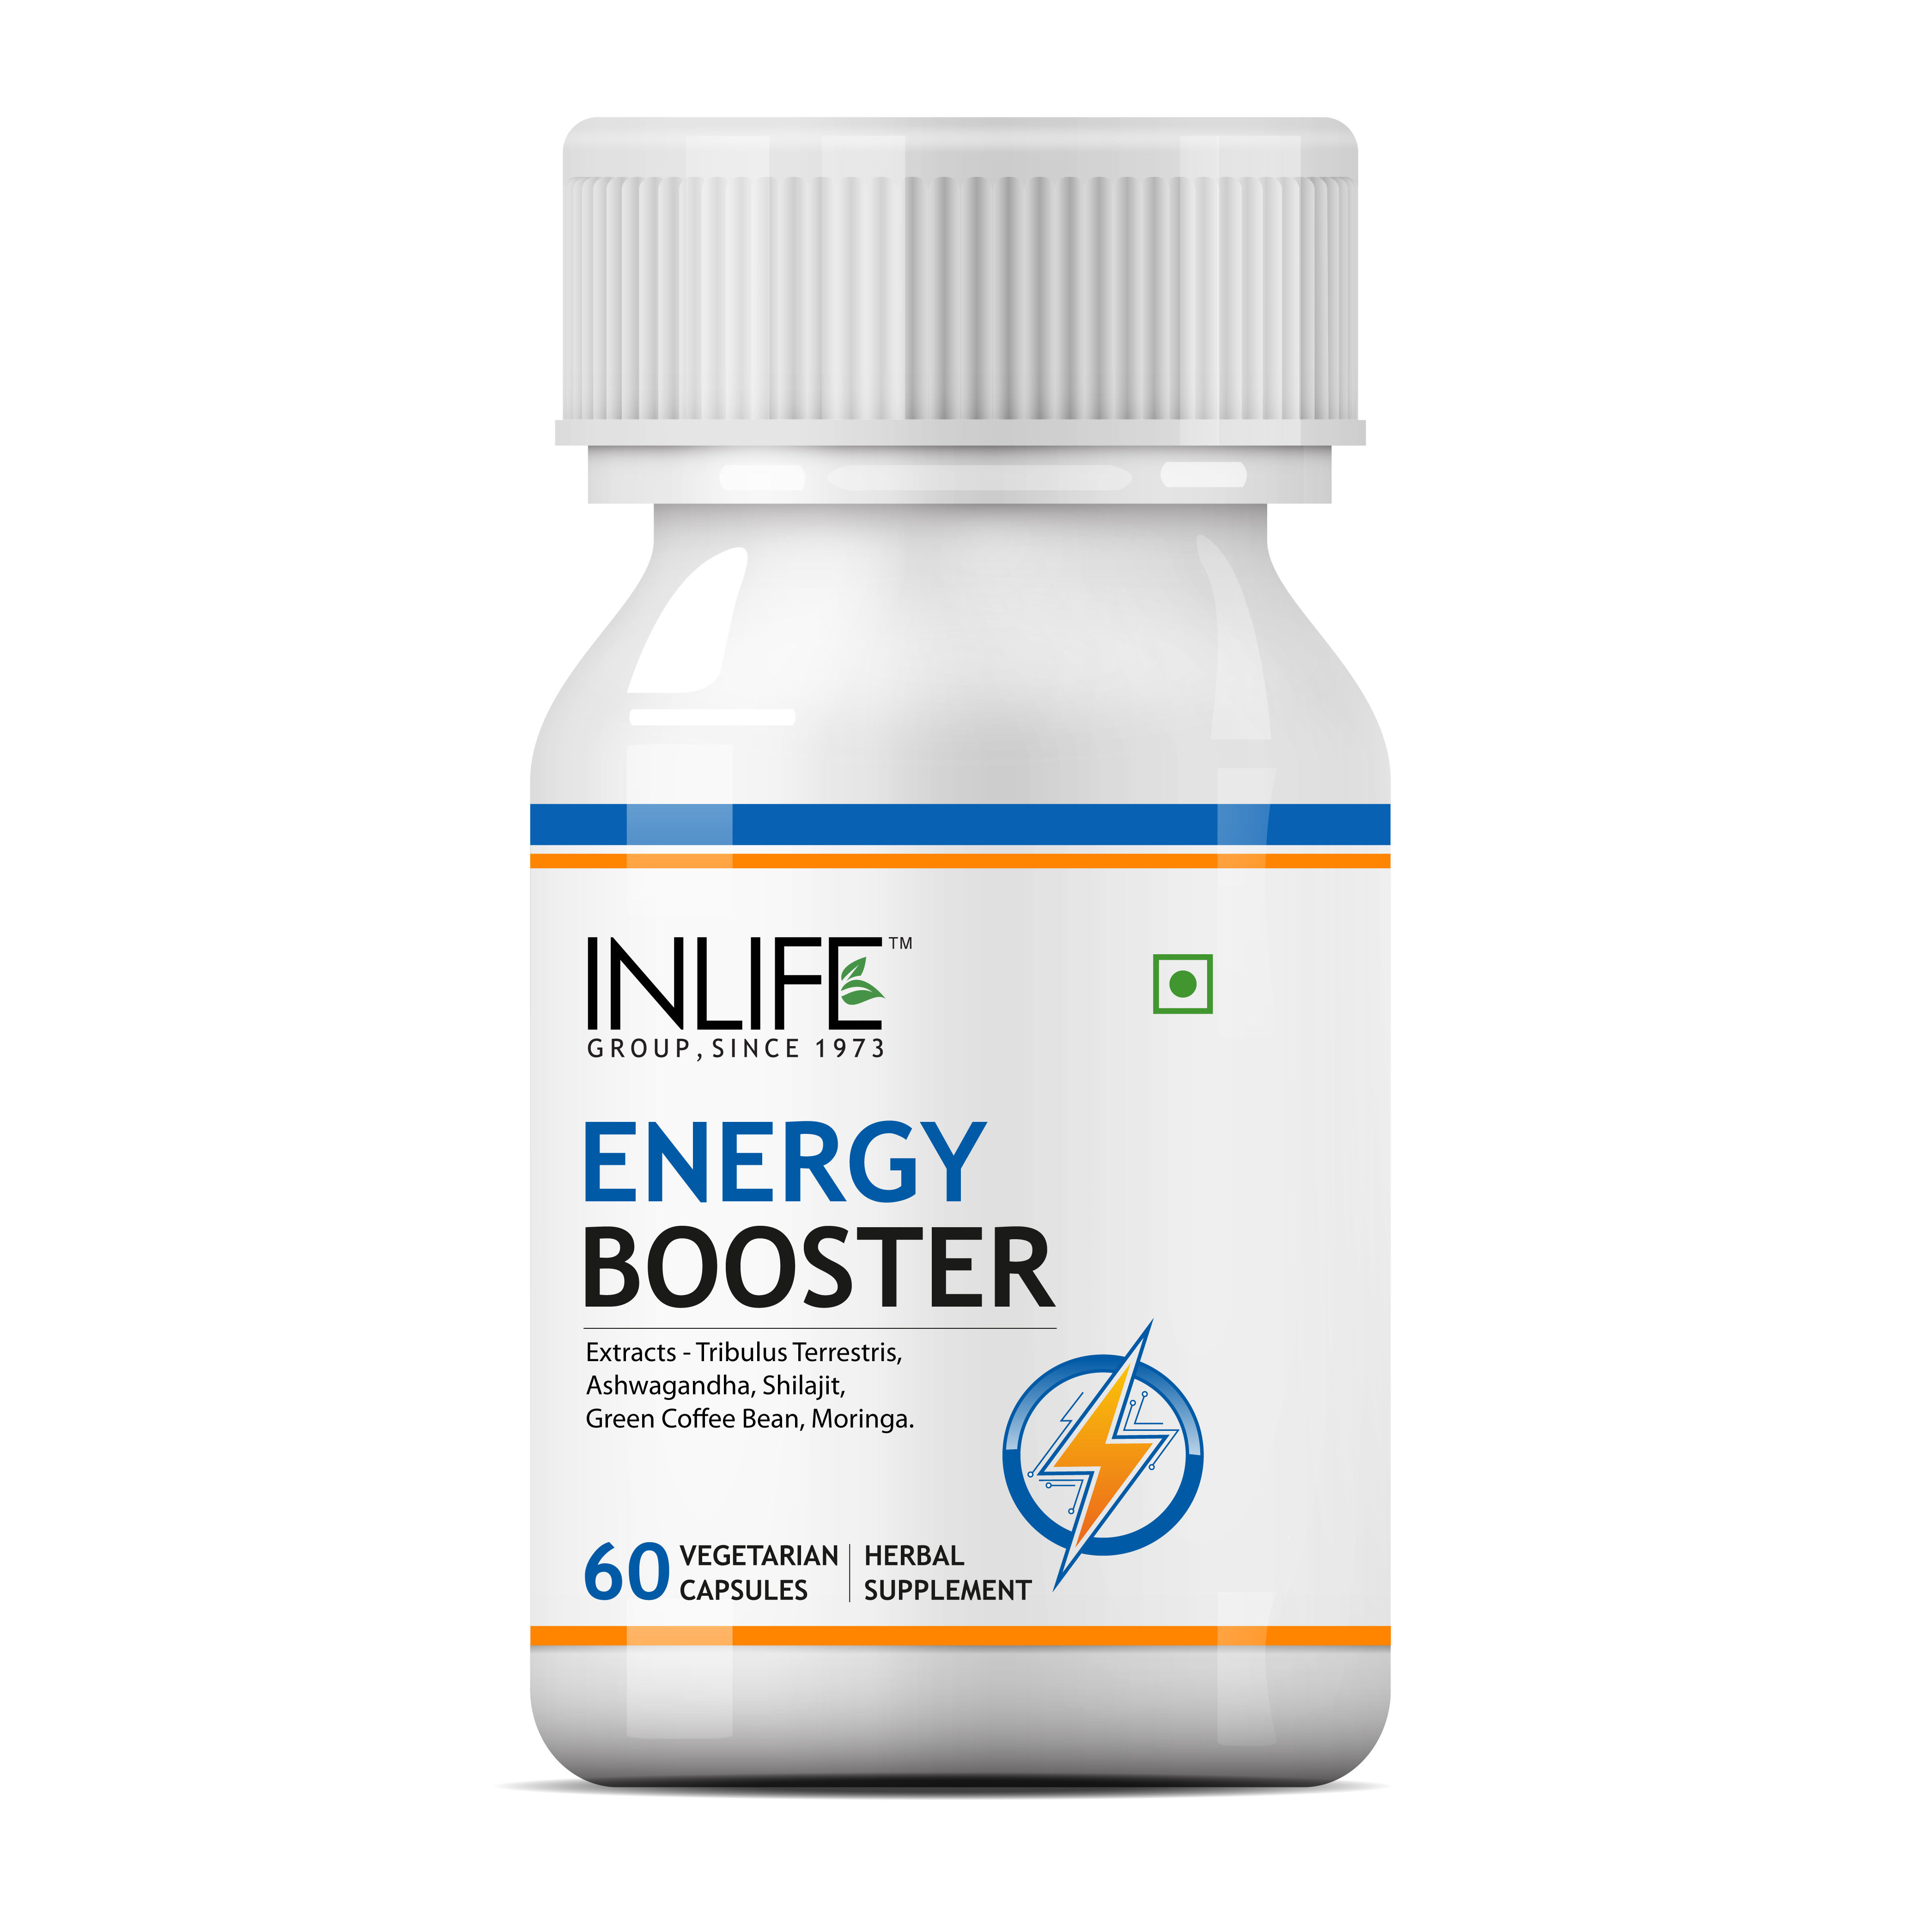 INLIFE Energy Booster Supplement 500mg (60 Vegetarian Capsules)